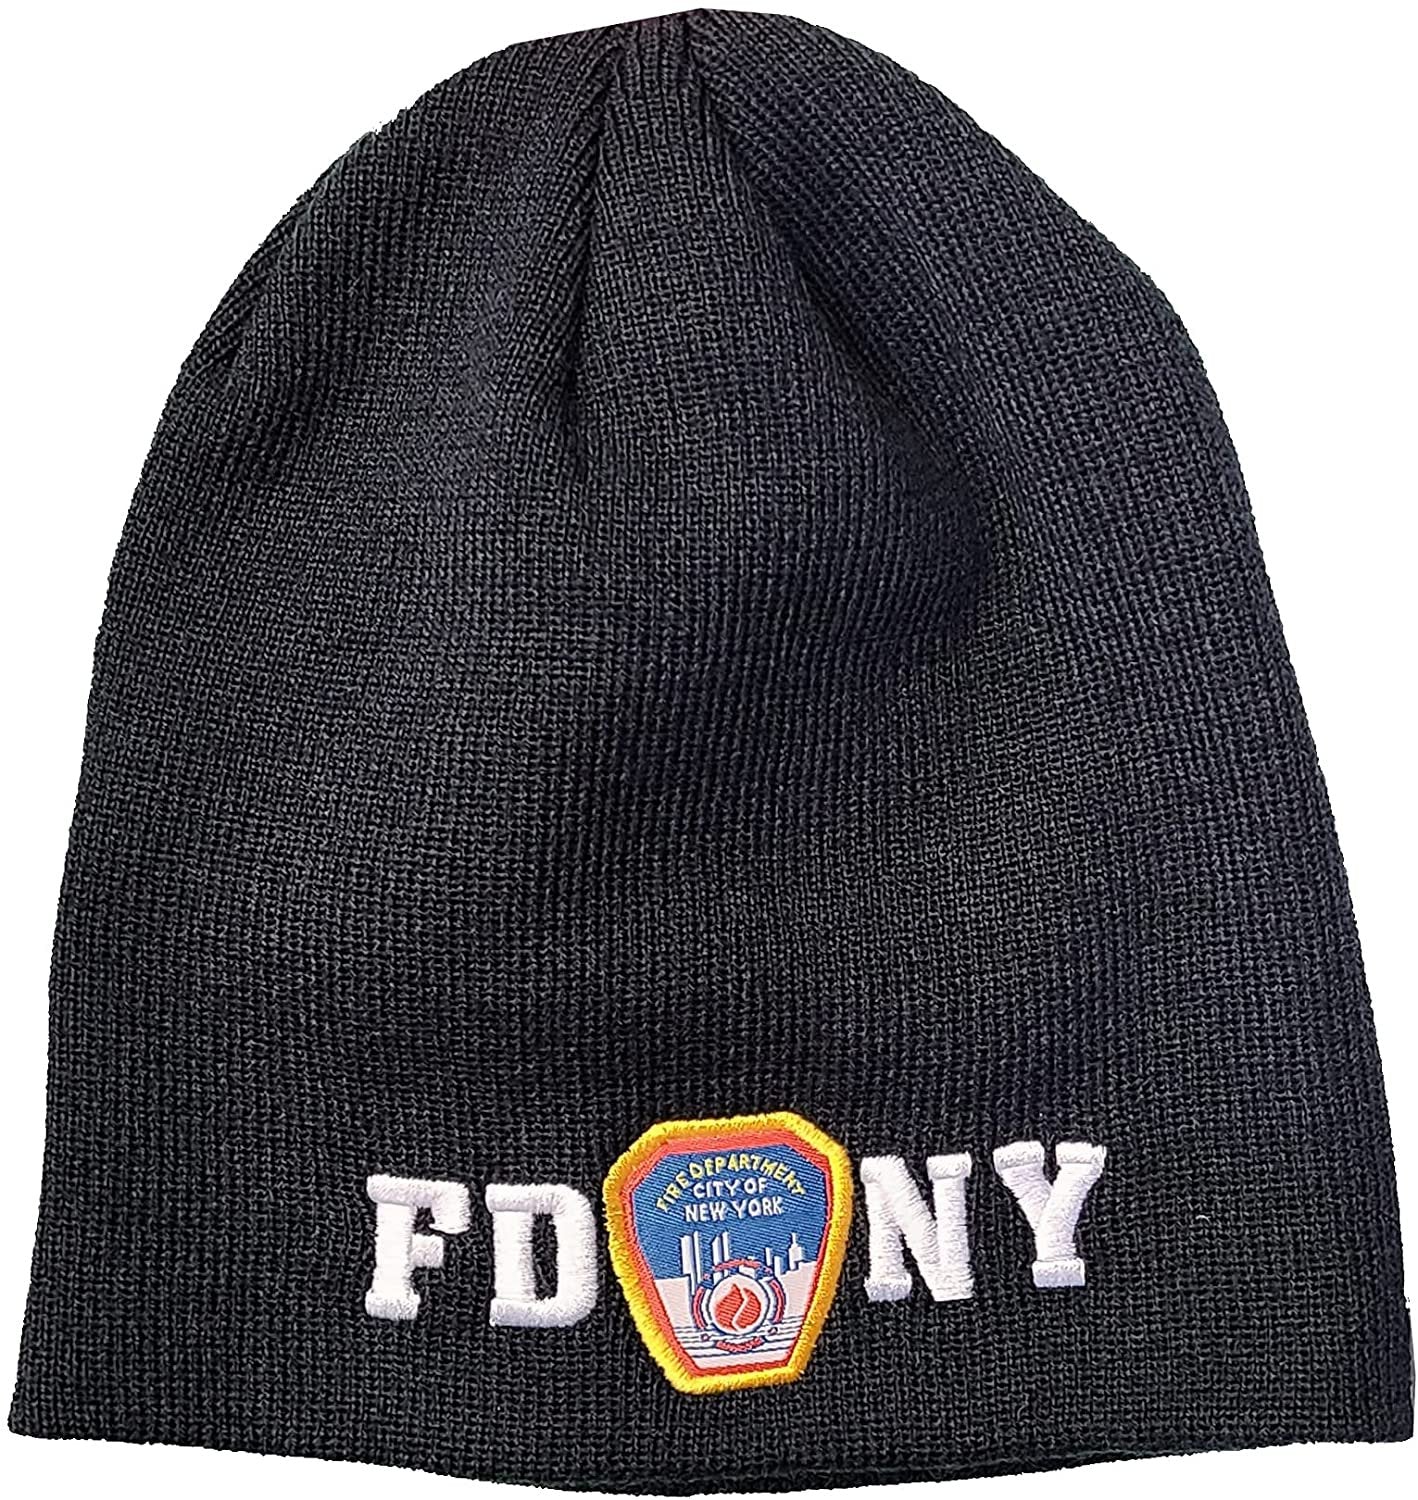 FDNY Beanie Winter Hats Officially Licensed Navy Blue